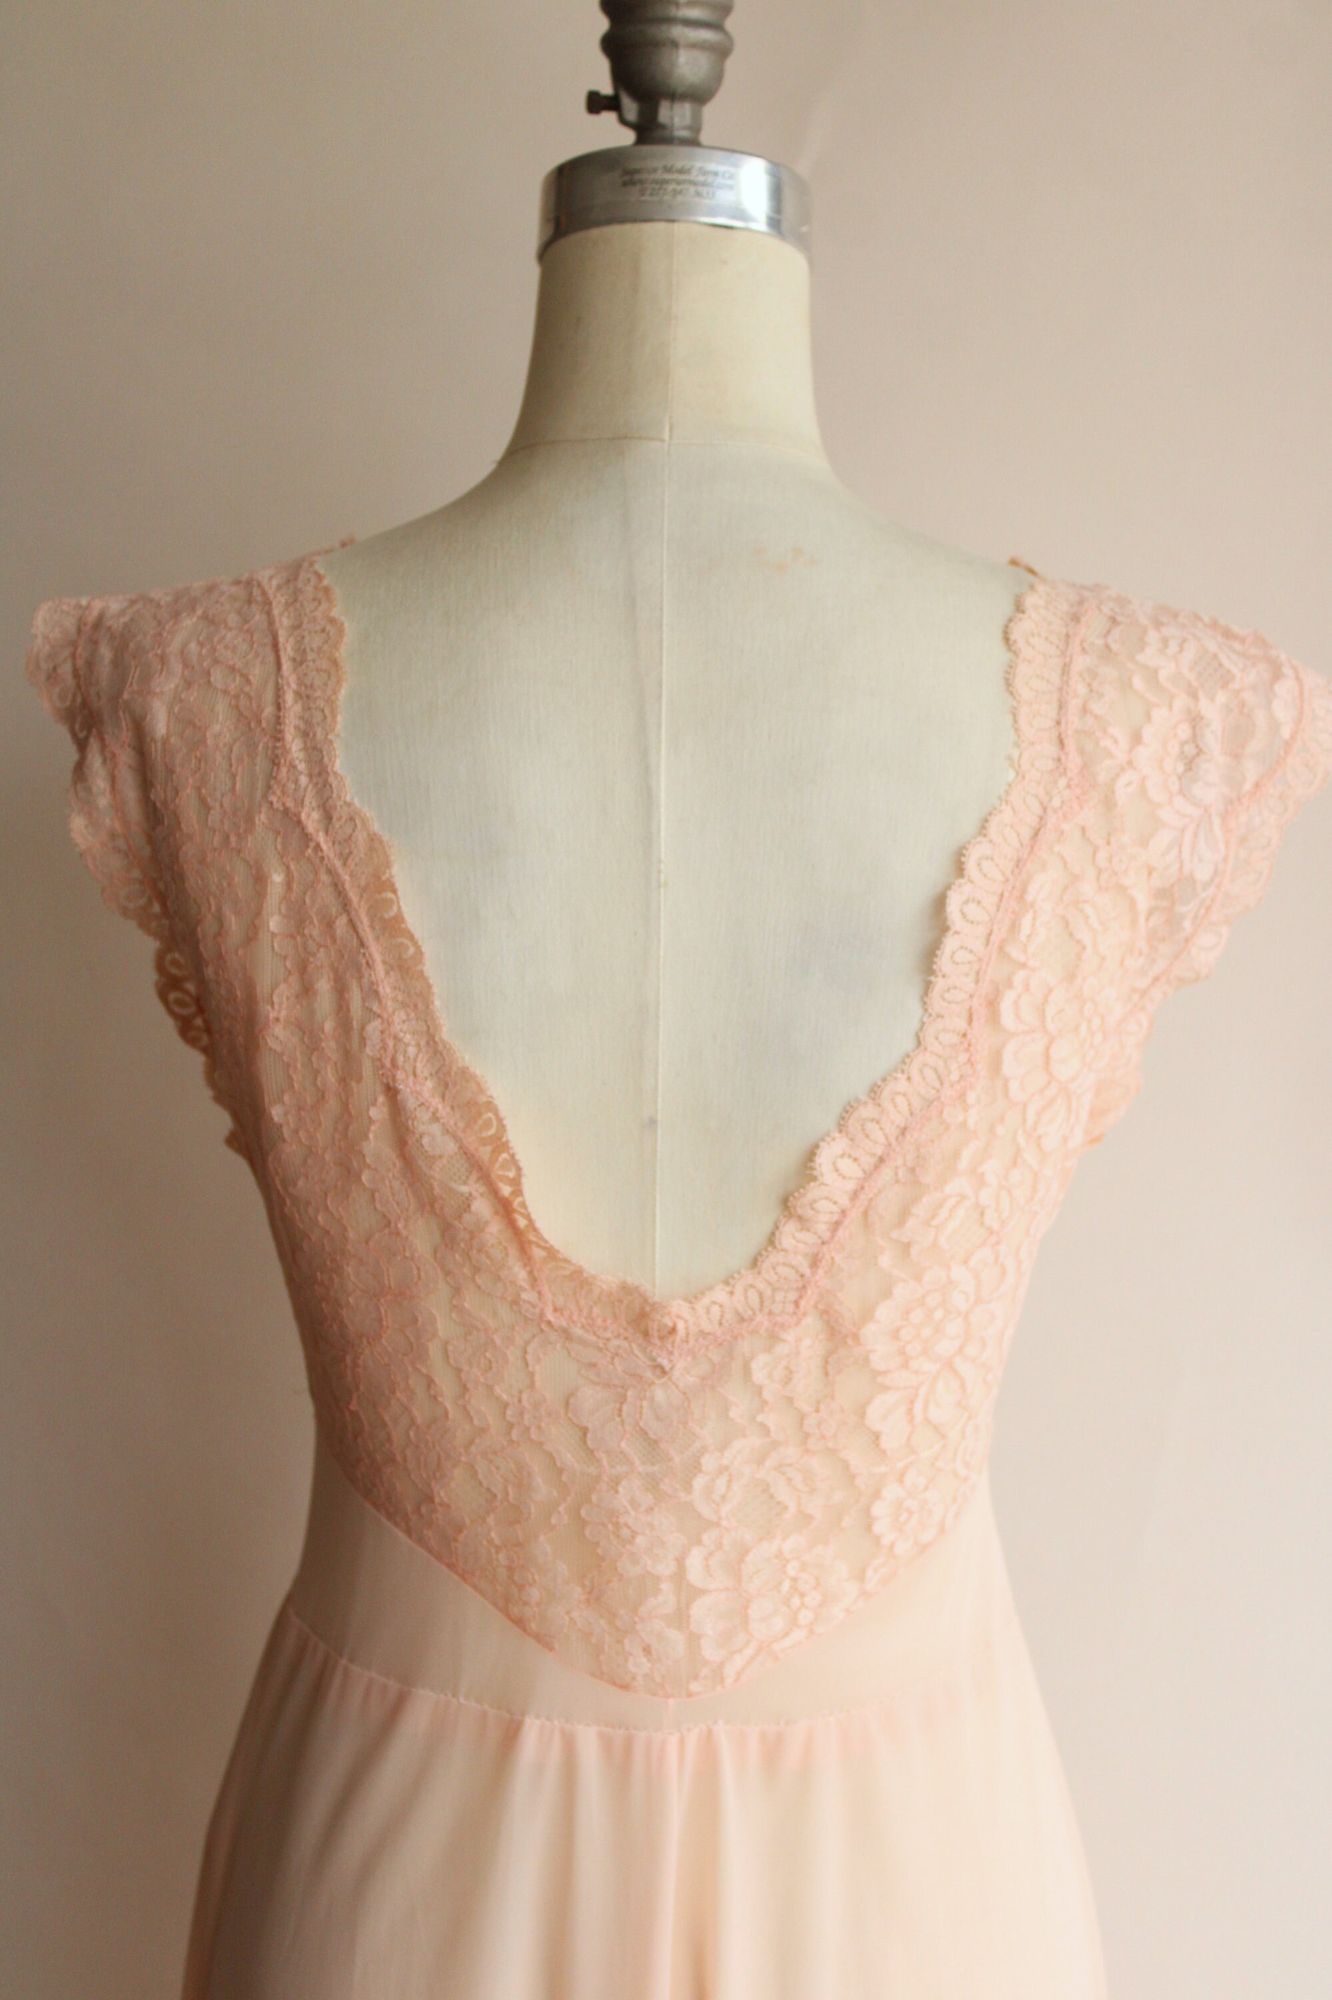 Vintage 1950s 1960s Vanity Fair Pink Nylon Nightgown with Lace Trim